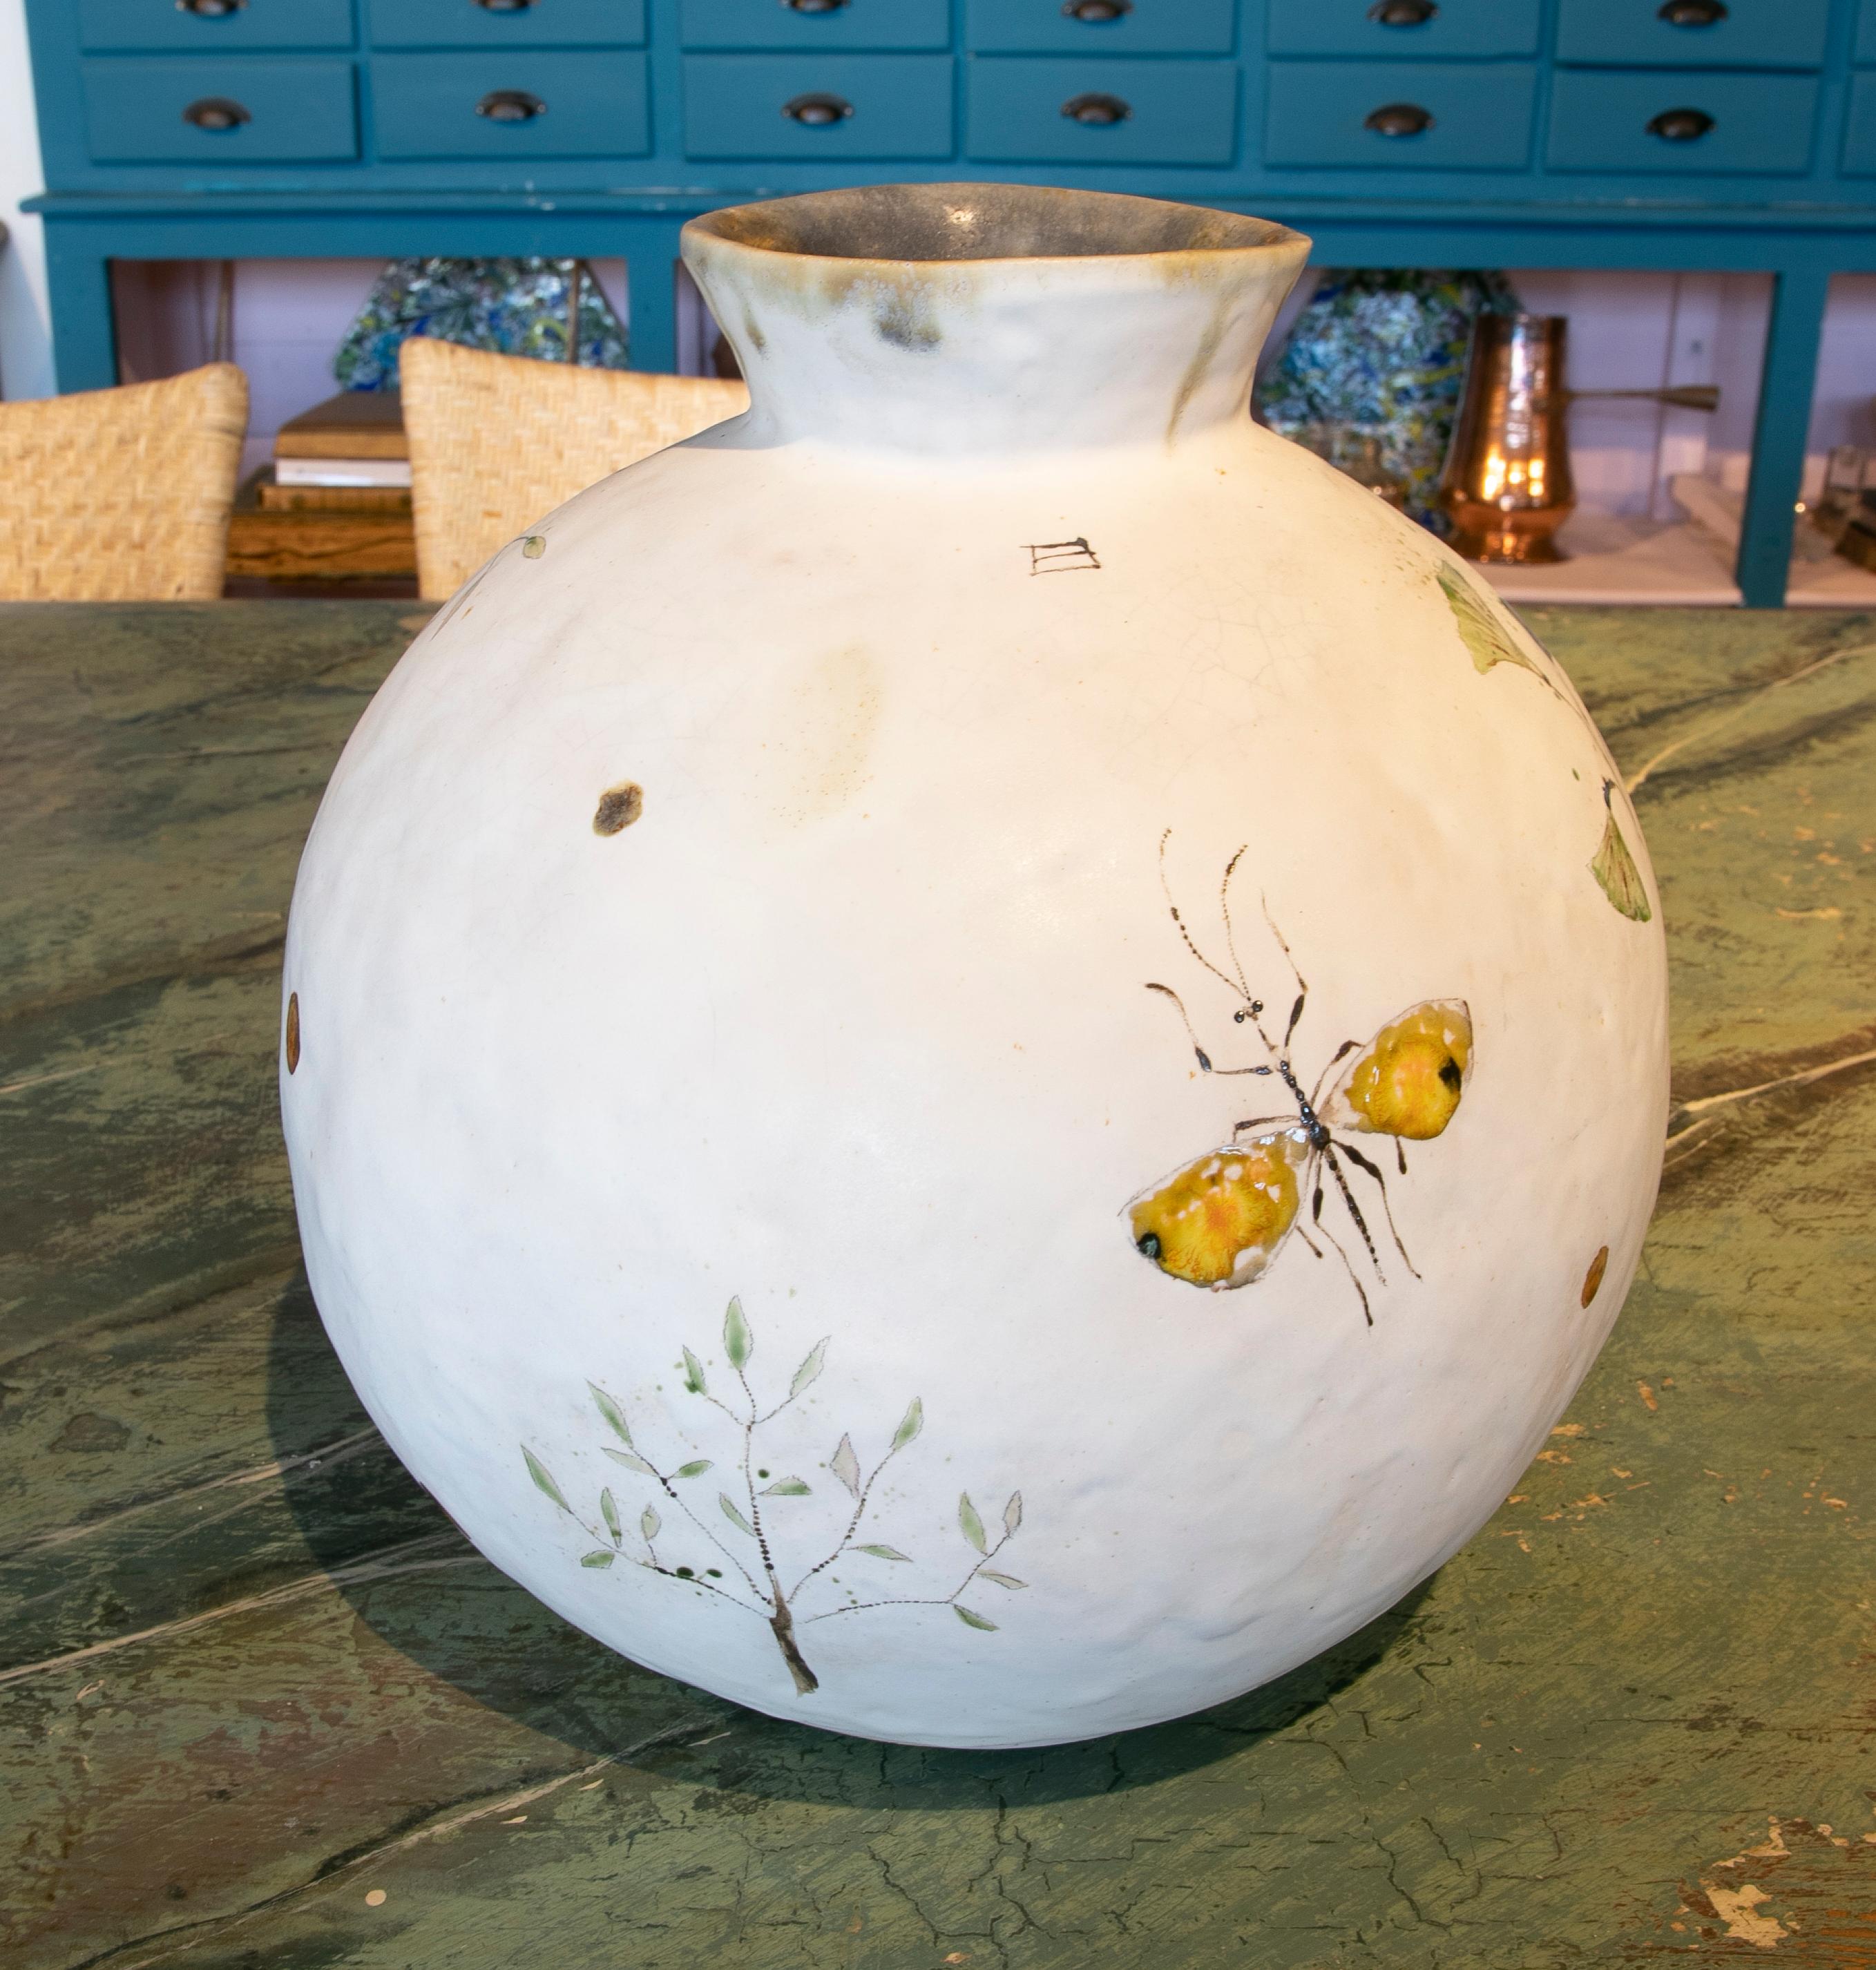 Contemporary Round-Shaped Vase in Hand-Painted Ceramic with Insects